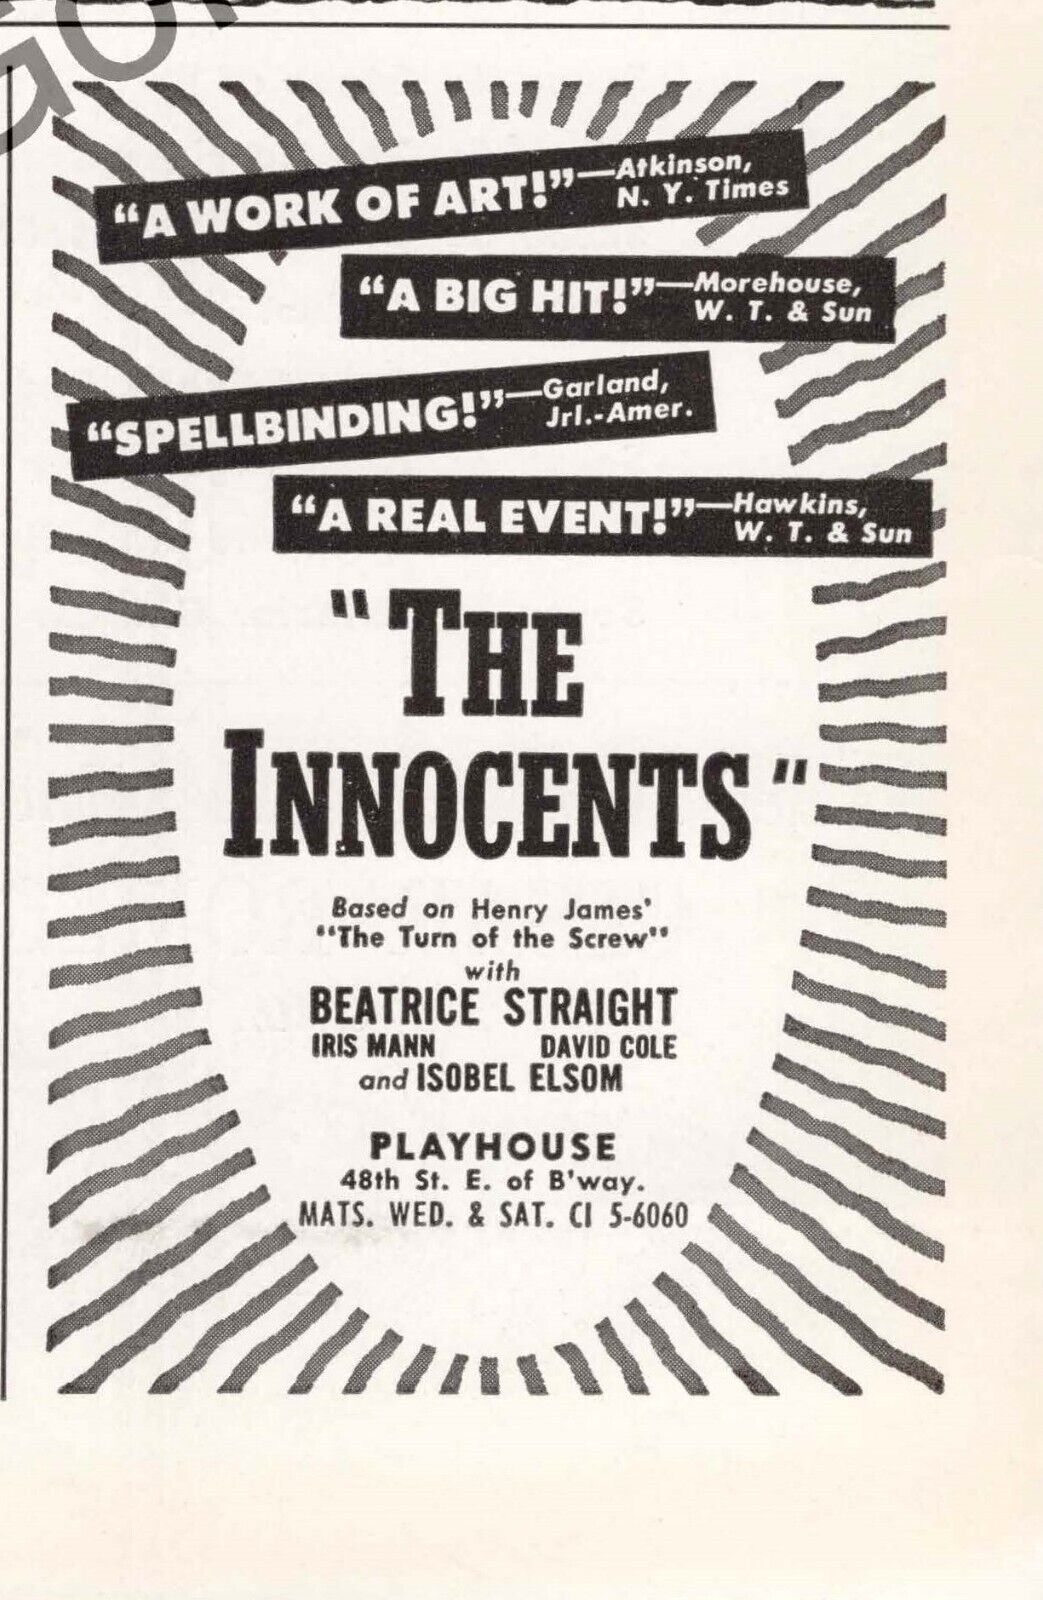 The Innocents with Beatrice Straight Performing at the Playhouse Print Ad 1950